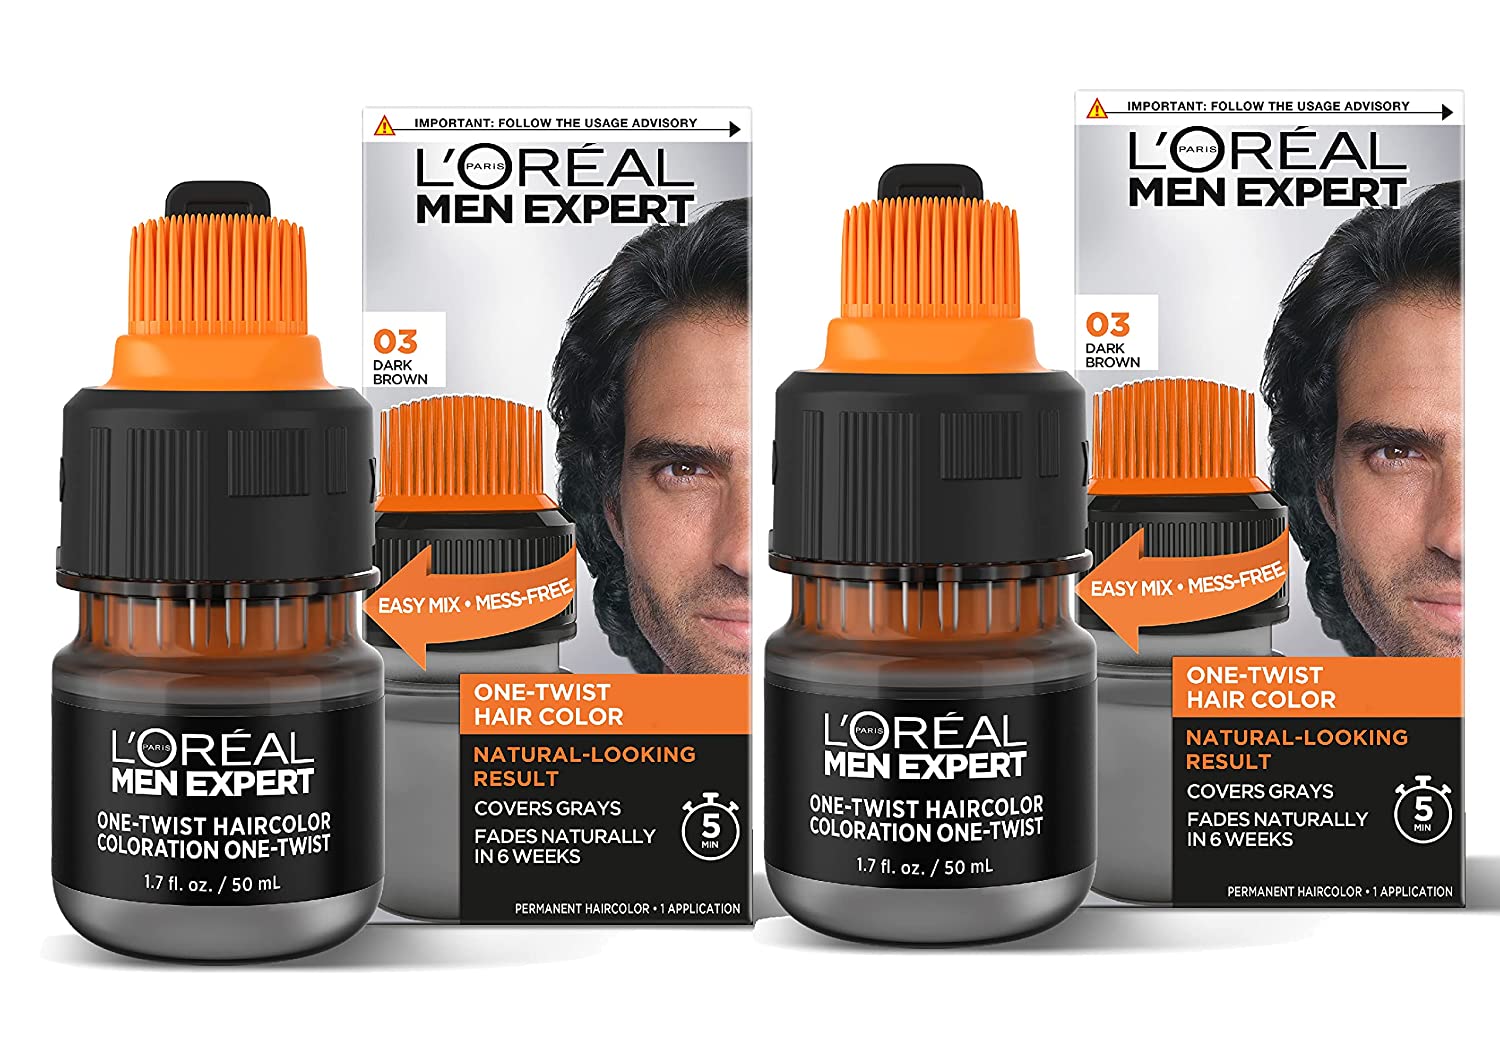 2-Pack L'Oreal Paris Men Expert One Twist Mess Free Permanent Hair Color (03 Dark Brown) $11.35 ($5.67 each) & More w/ S&S + Free Shipping w/ Prime or on $25+